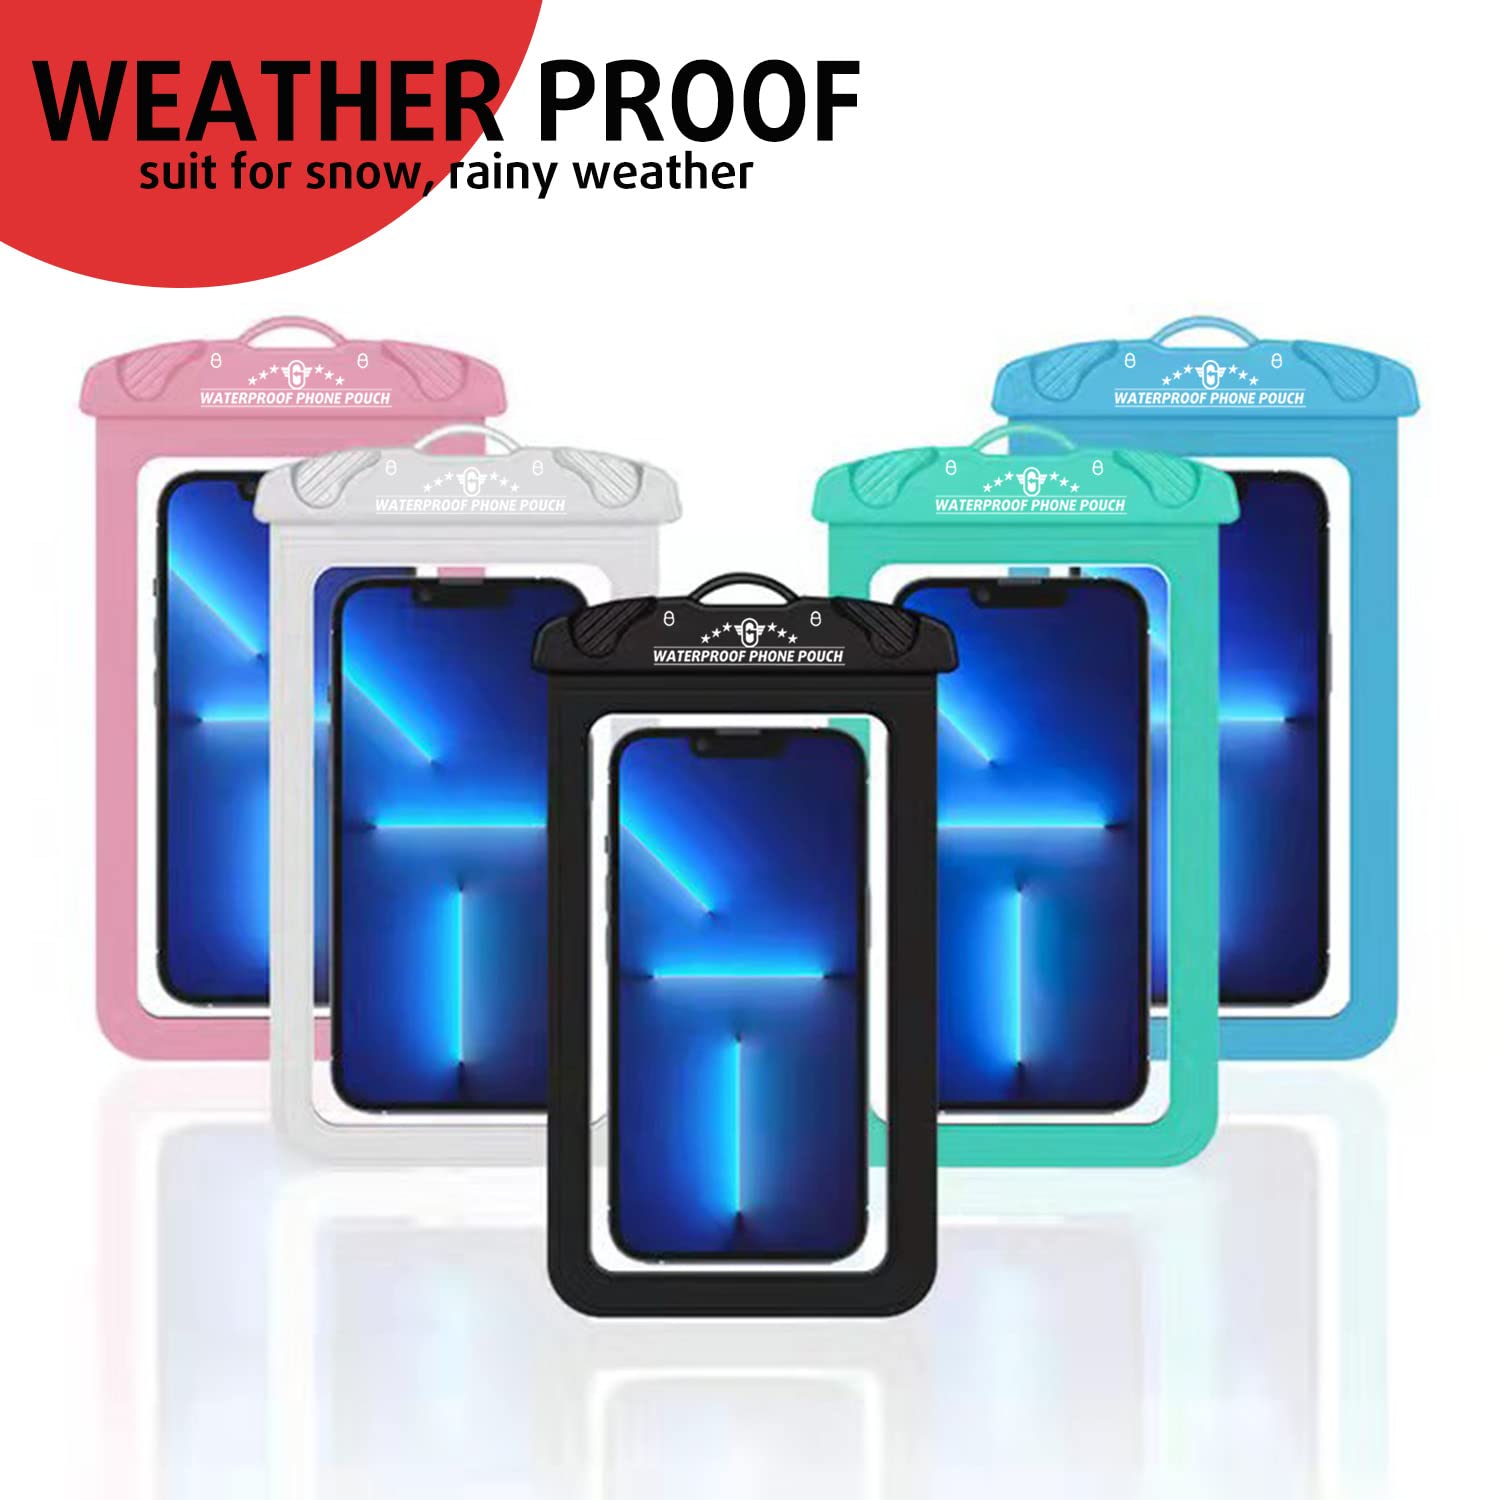 Waterproof Phone Pouch 2 Pack, 100% Waterproof Large Phone Dry Bag for iPhone 14 Pro Max, 13 Pro Max, Samsung Galaxy S23 Ultra, Google Pixel 6 Pixel and Other Phones Black